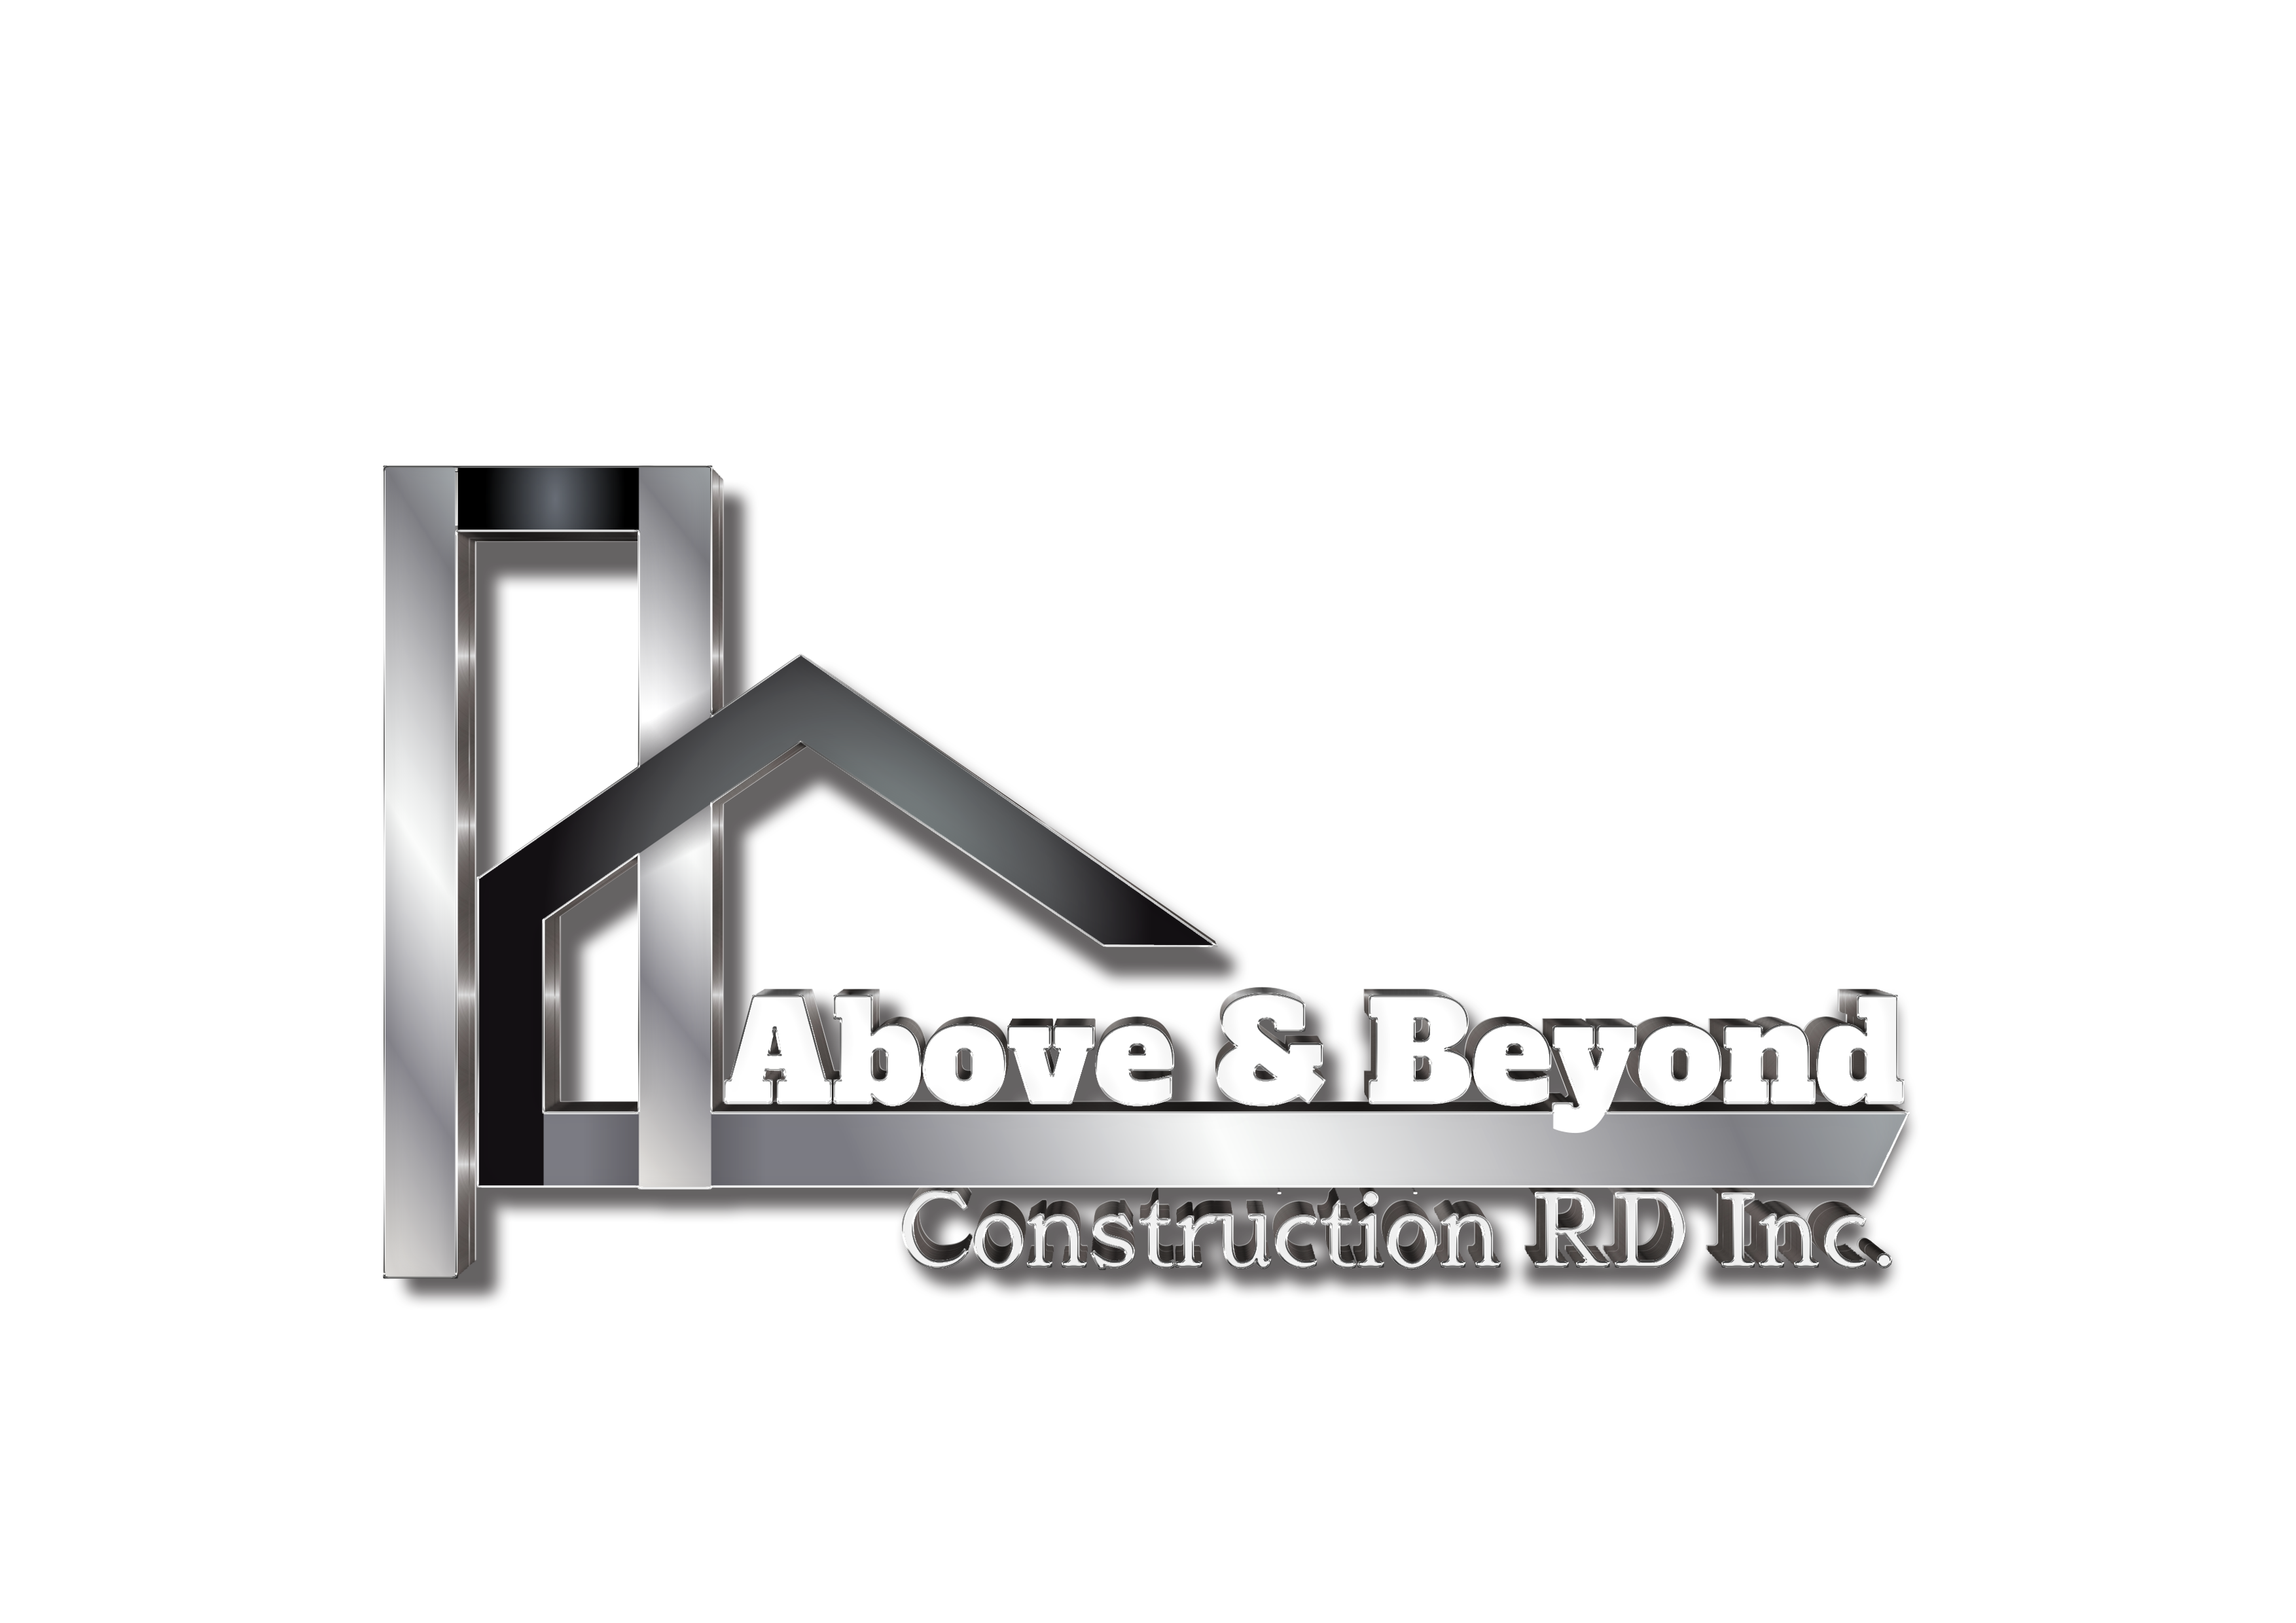 Above & Beyond Construction